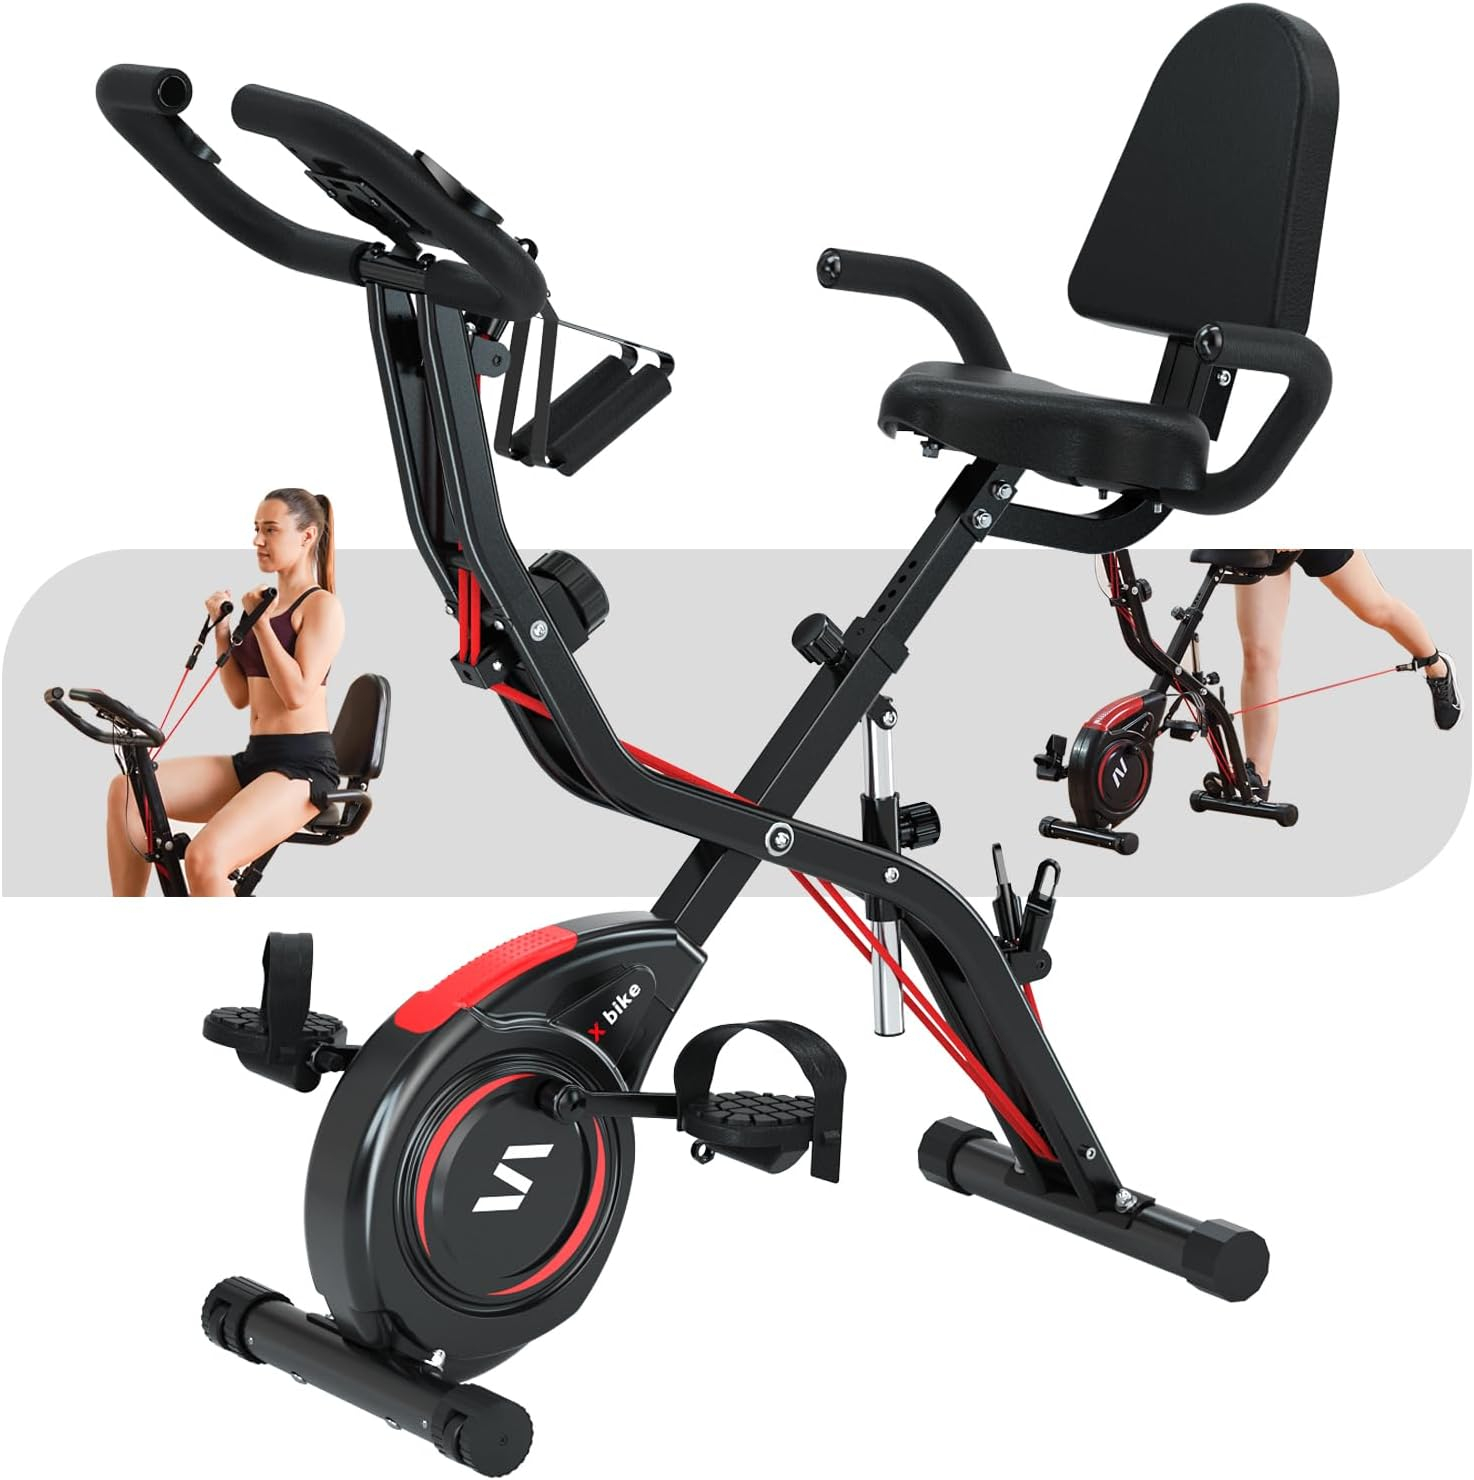 SINUODE Folding Exercise Bike with Arm  Leg Workout, 4-in-1 Foldable Recumbent Stationary Bike for Seniors, Indoor Cycling Bike with 16-Level Magnetic Resist, 330LB Capacity, Large Soft Seat w/ Backrest, Pluse Sensor